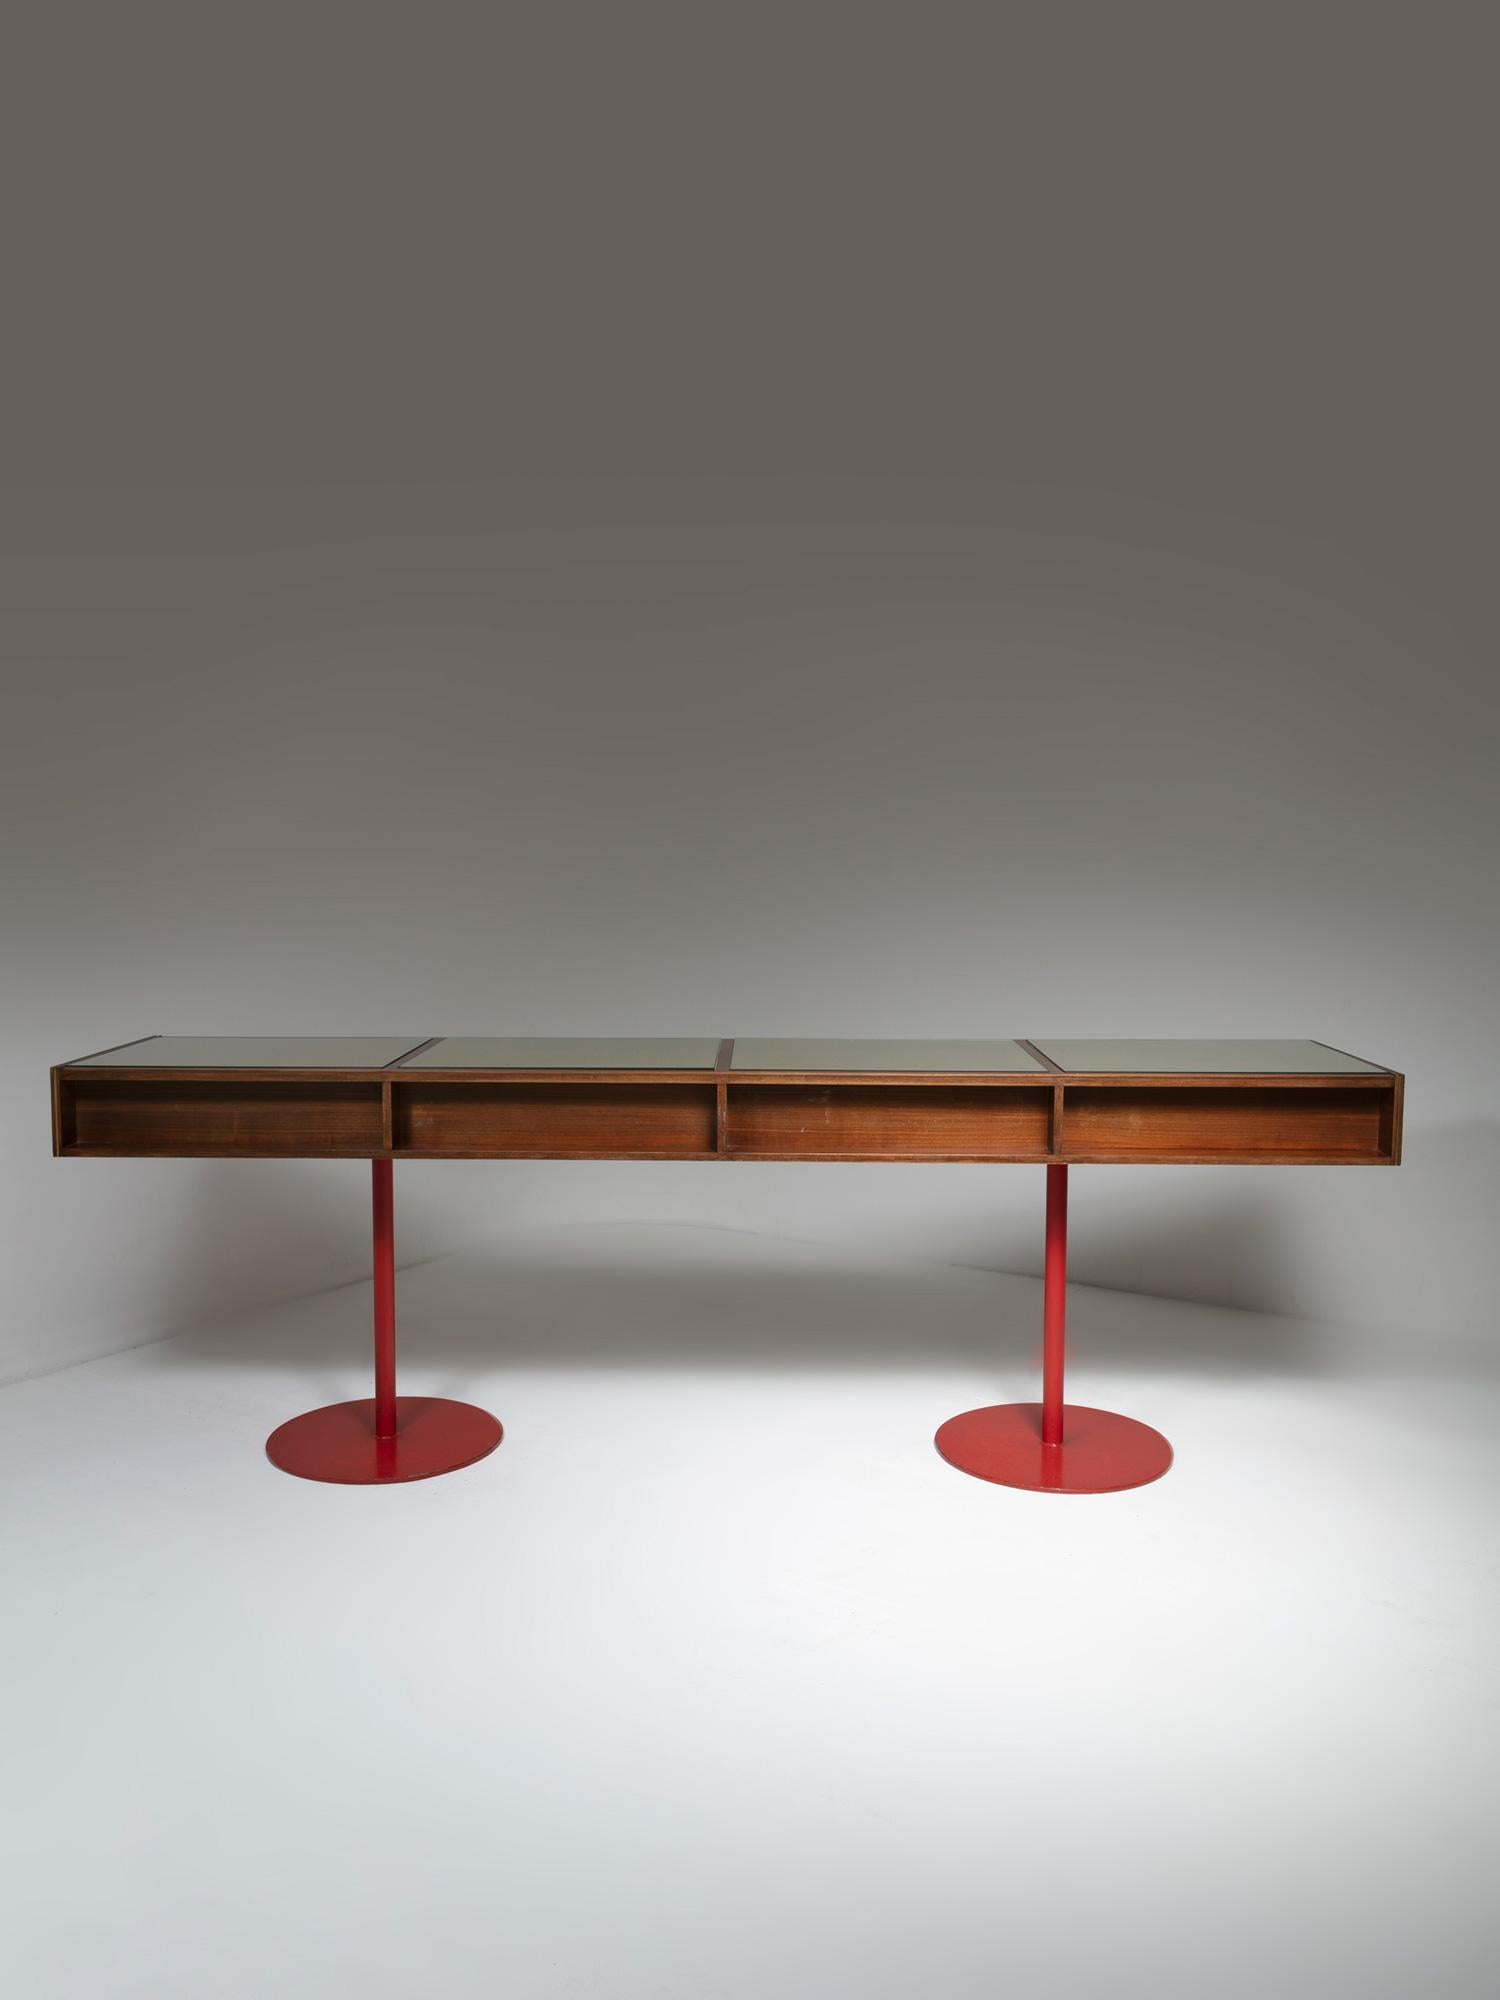 Generous wood counter with iron feet.
top is visually divided on four squared areas with glass top.
One side is equipped with several drawers.
The piece comes from a commercial area on a Carlo Scarpa building.